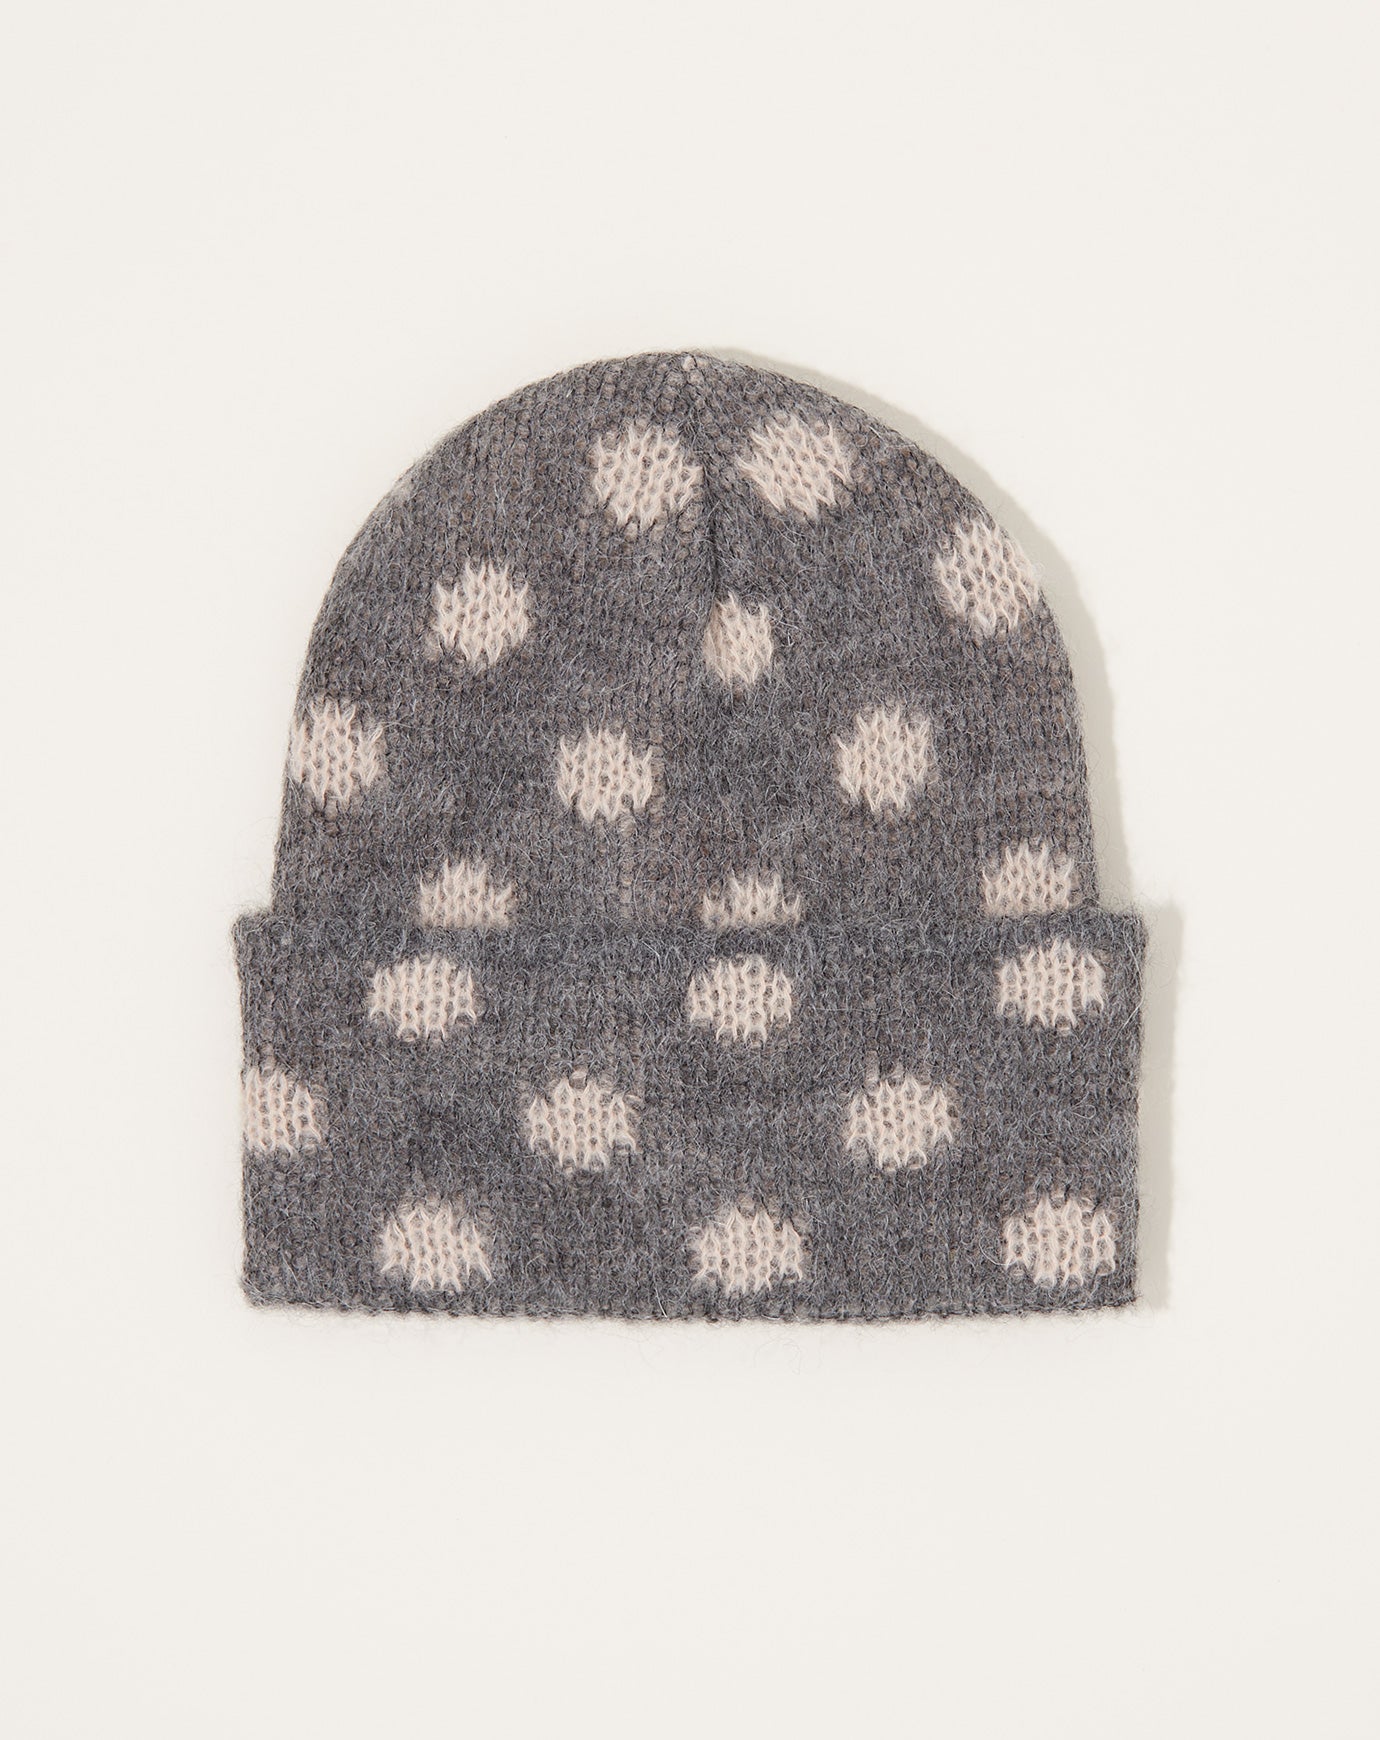 Exquisite J Knit Dots Beanie in Grey & Petal Pink